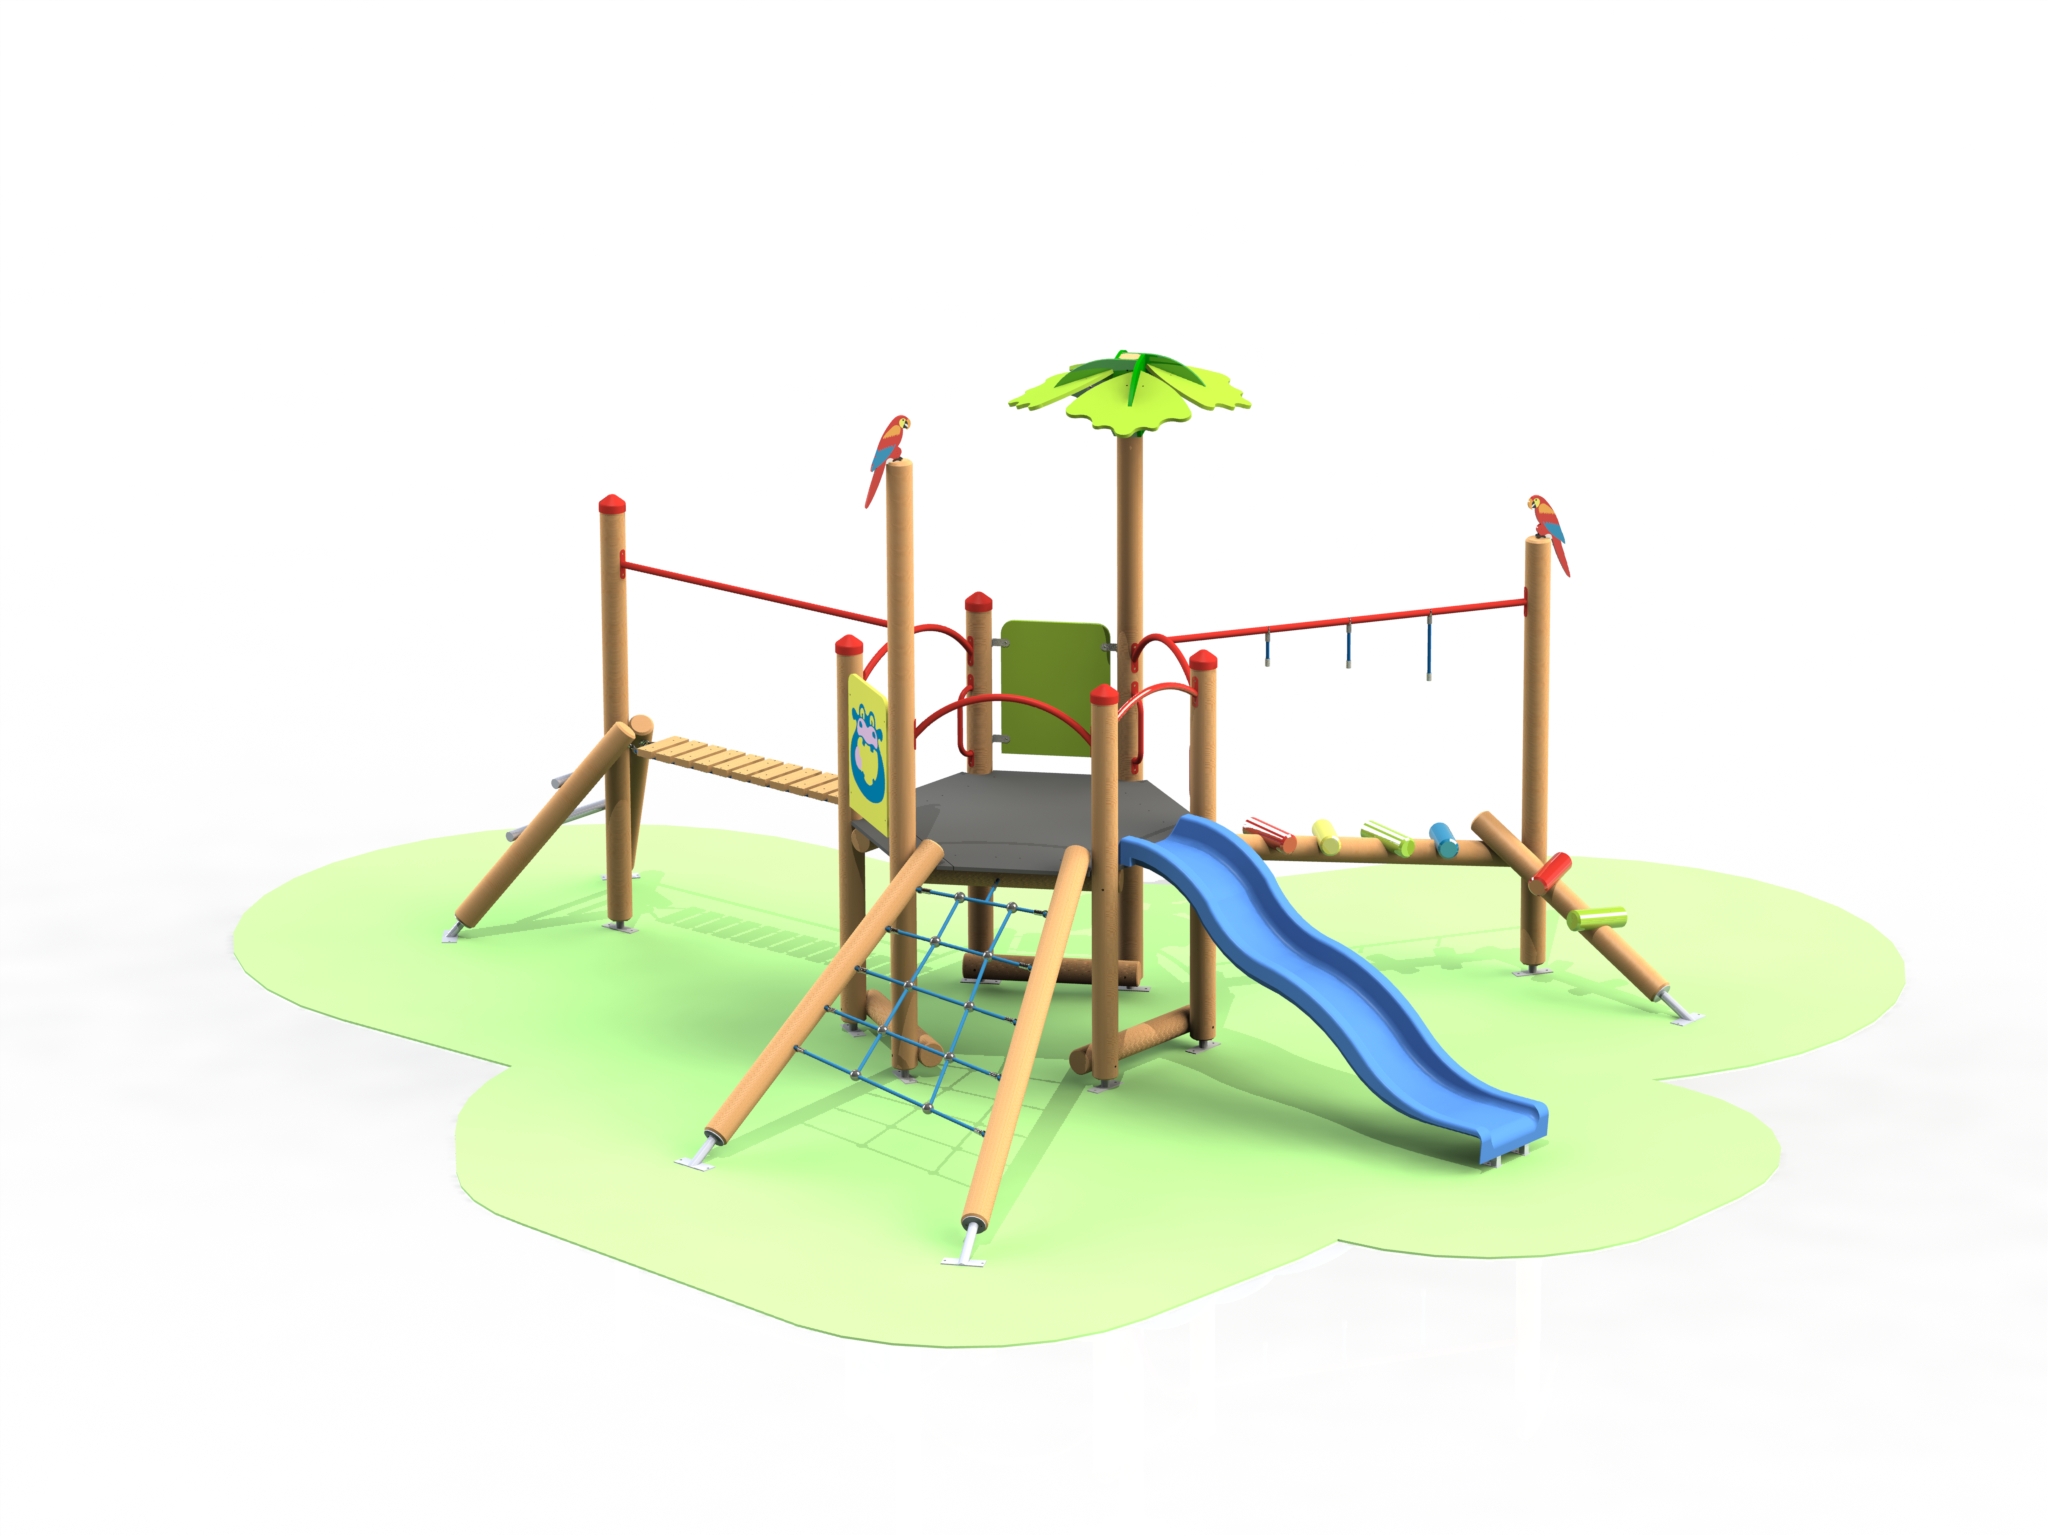 Product photo: Combined children play facility, Г36 model